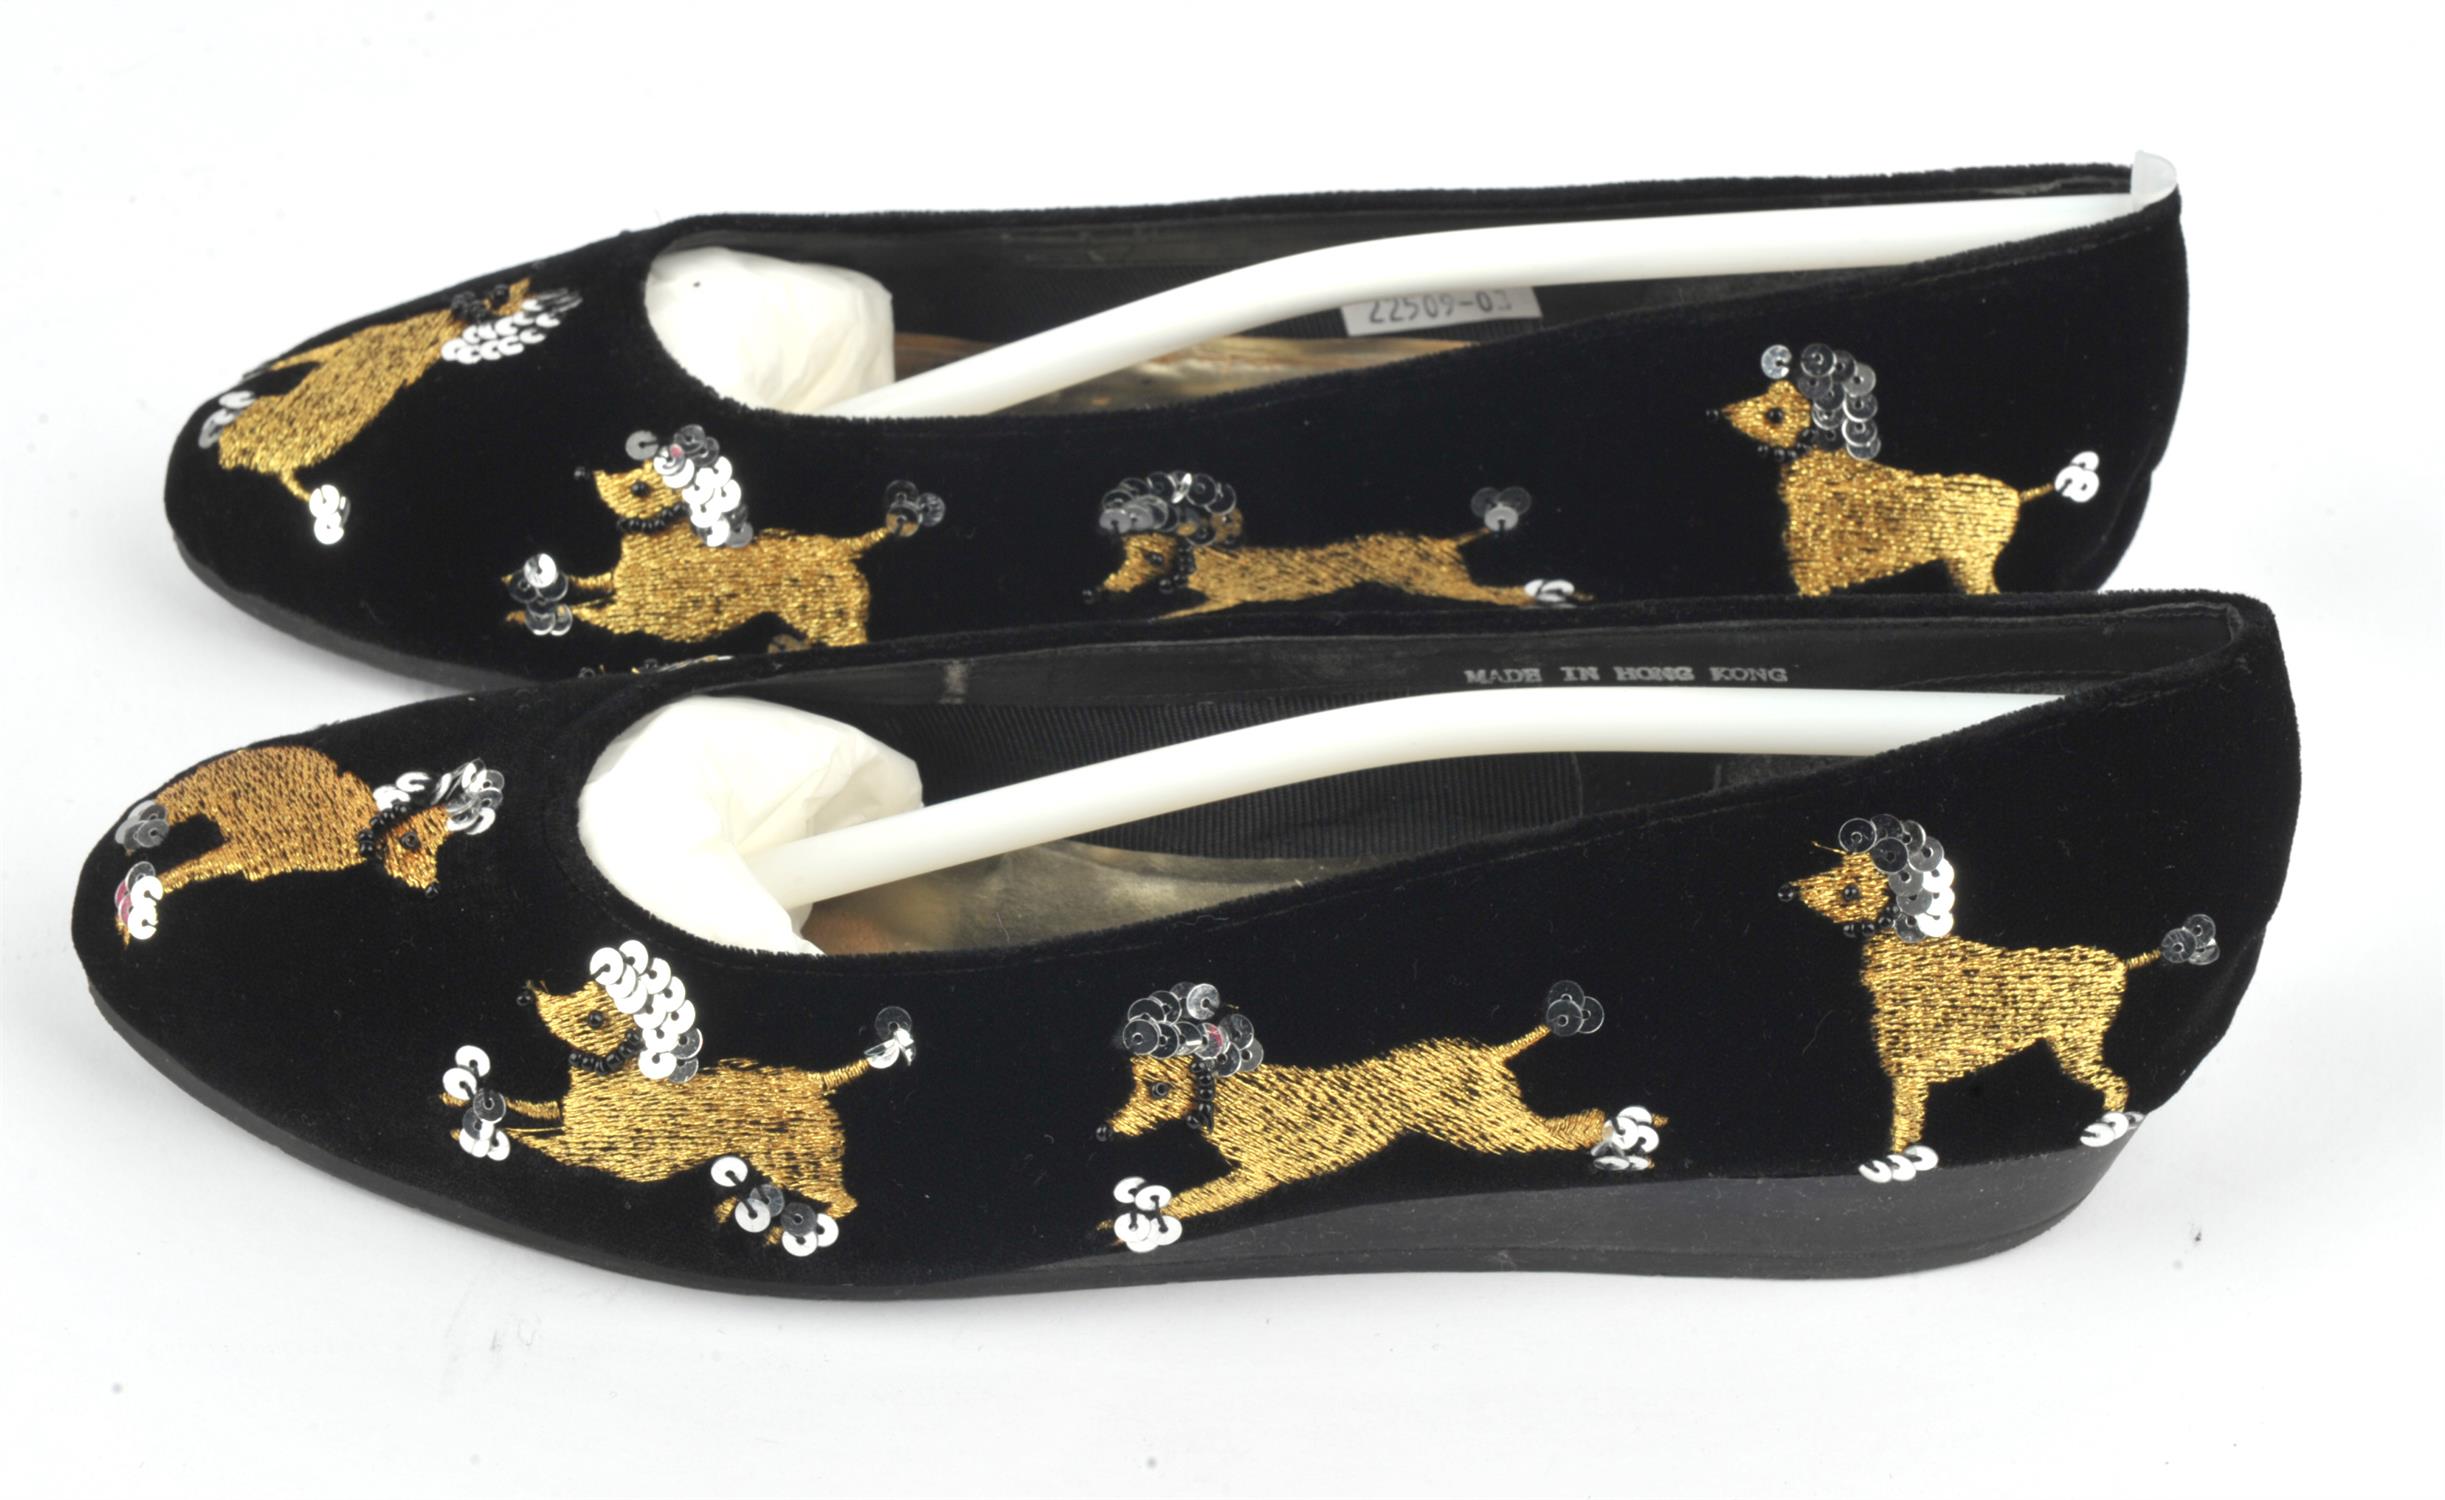 FRANKIE & BABY, BEVERLY FELDMAN (Russell & Bromley) black velvet flat ballet pumps with gold and - Image 3 of 5